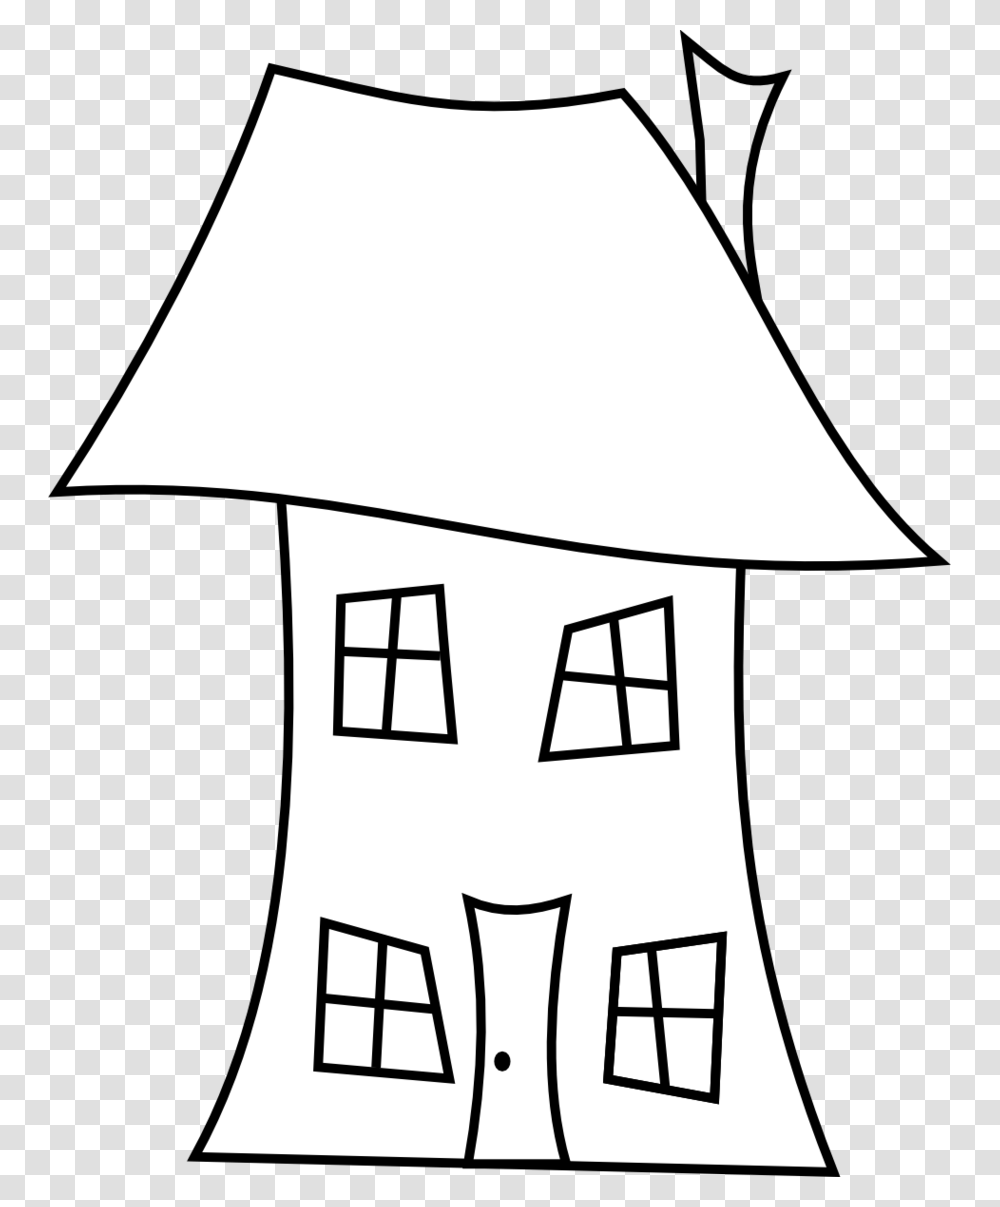 Line Drawing House Clipart Best Line Of Houses Cartoon, Outdoors, Nature, Building, First Aid Transparent Png